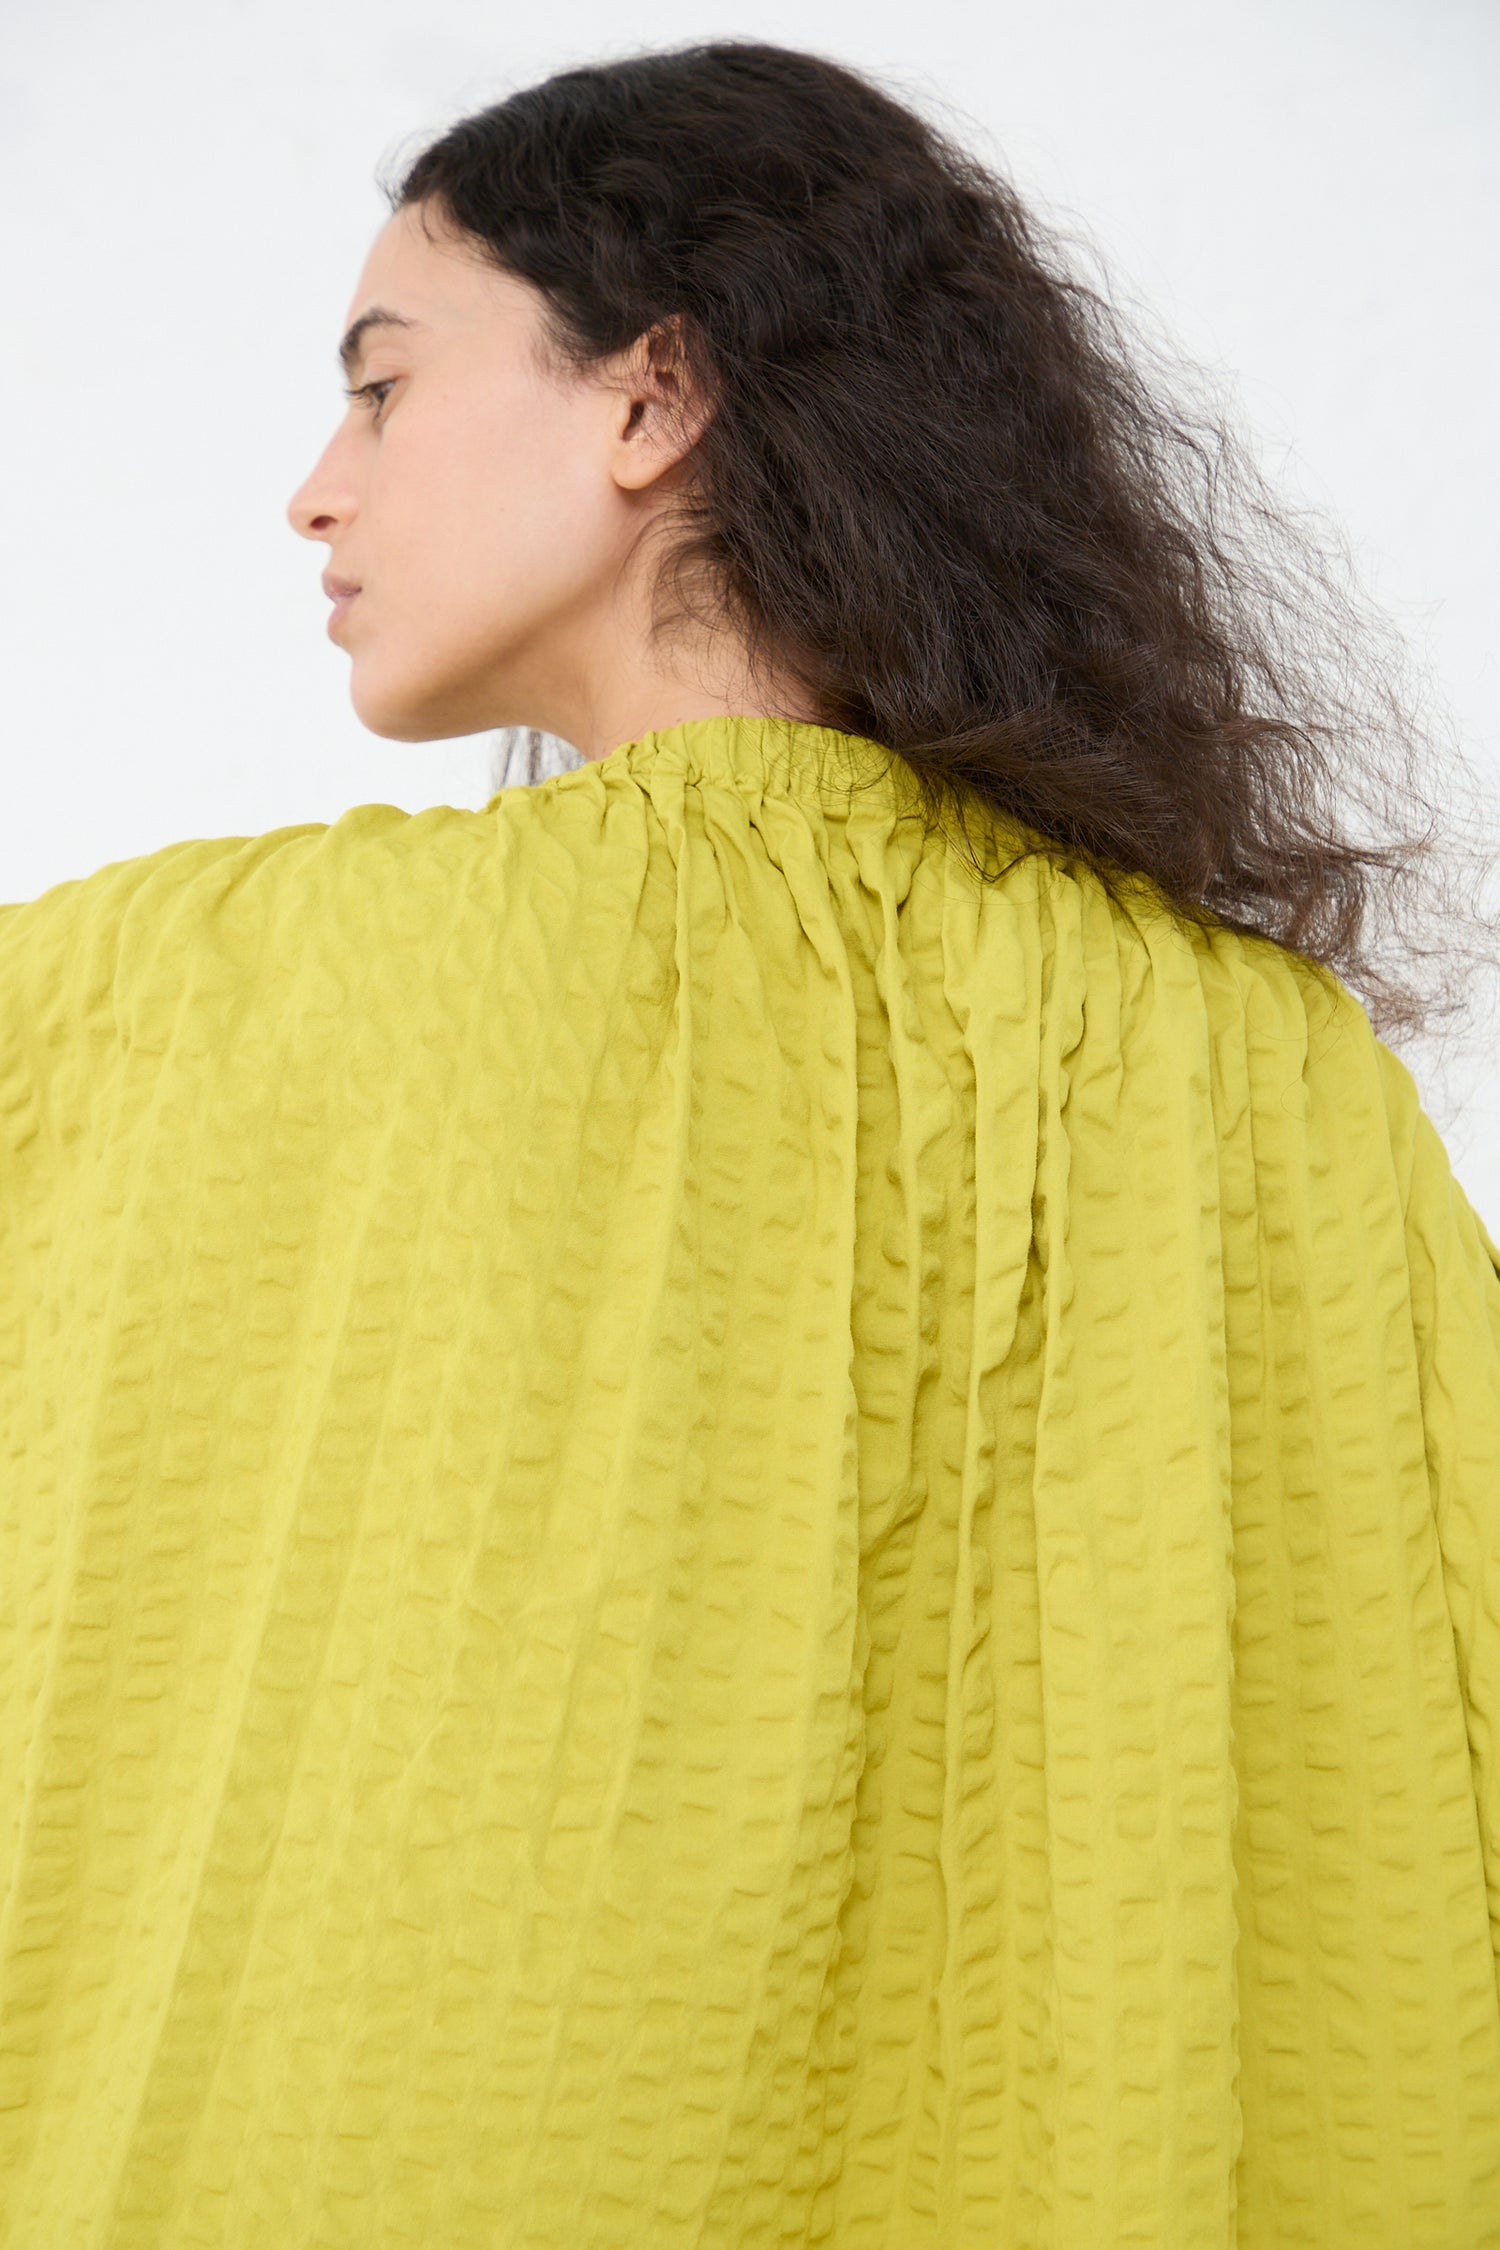 A woman in a Black Crane cotton seersucker sack dress in turmeric is seen from a side angle against a plain background, with her face turned away from the camera.